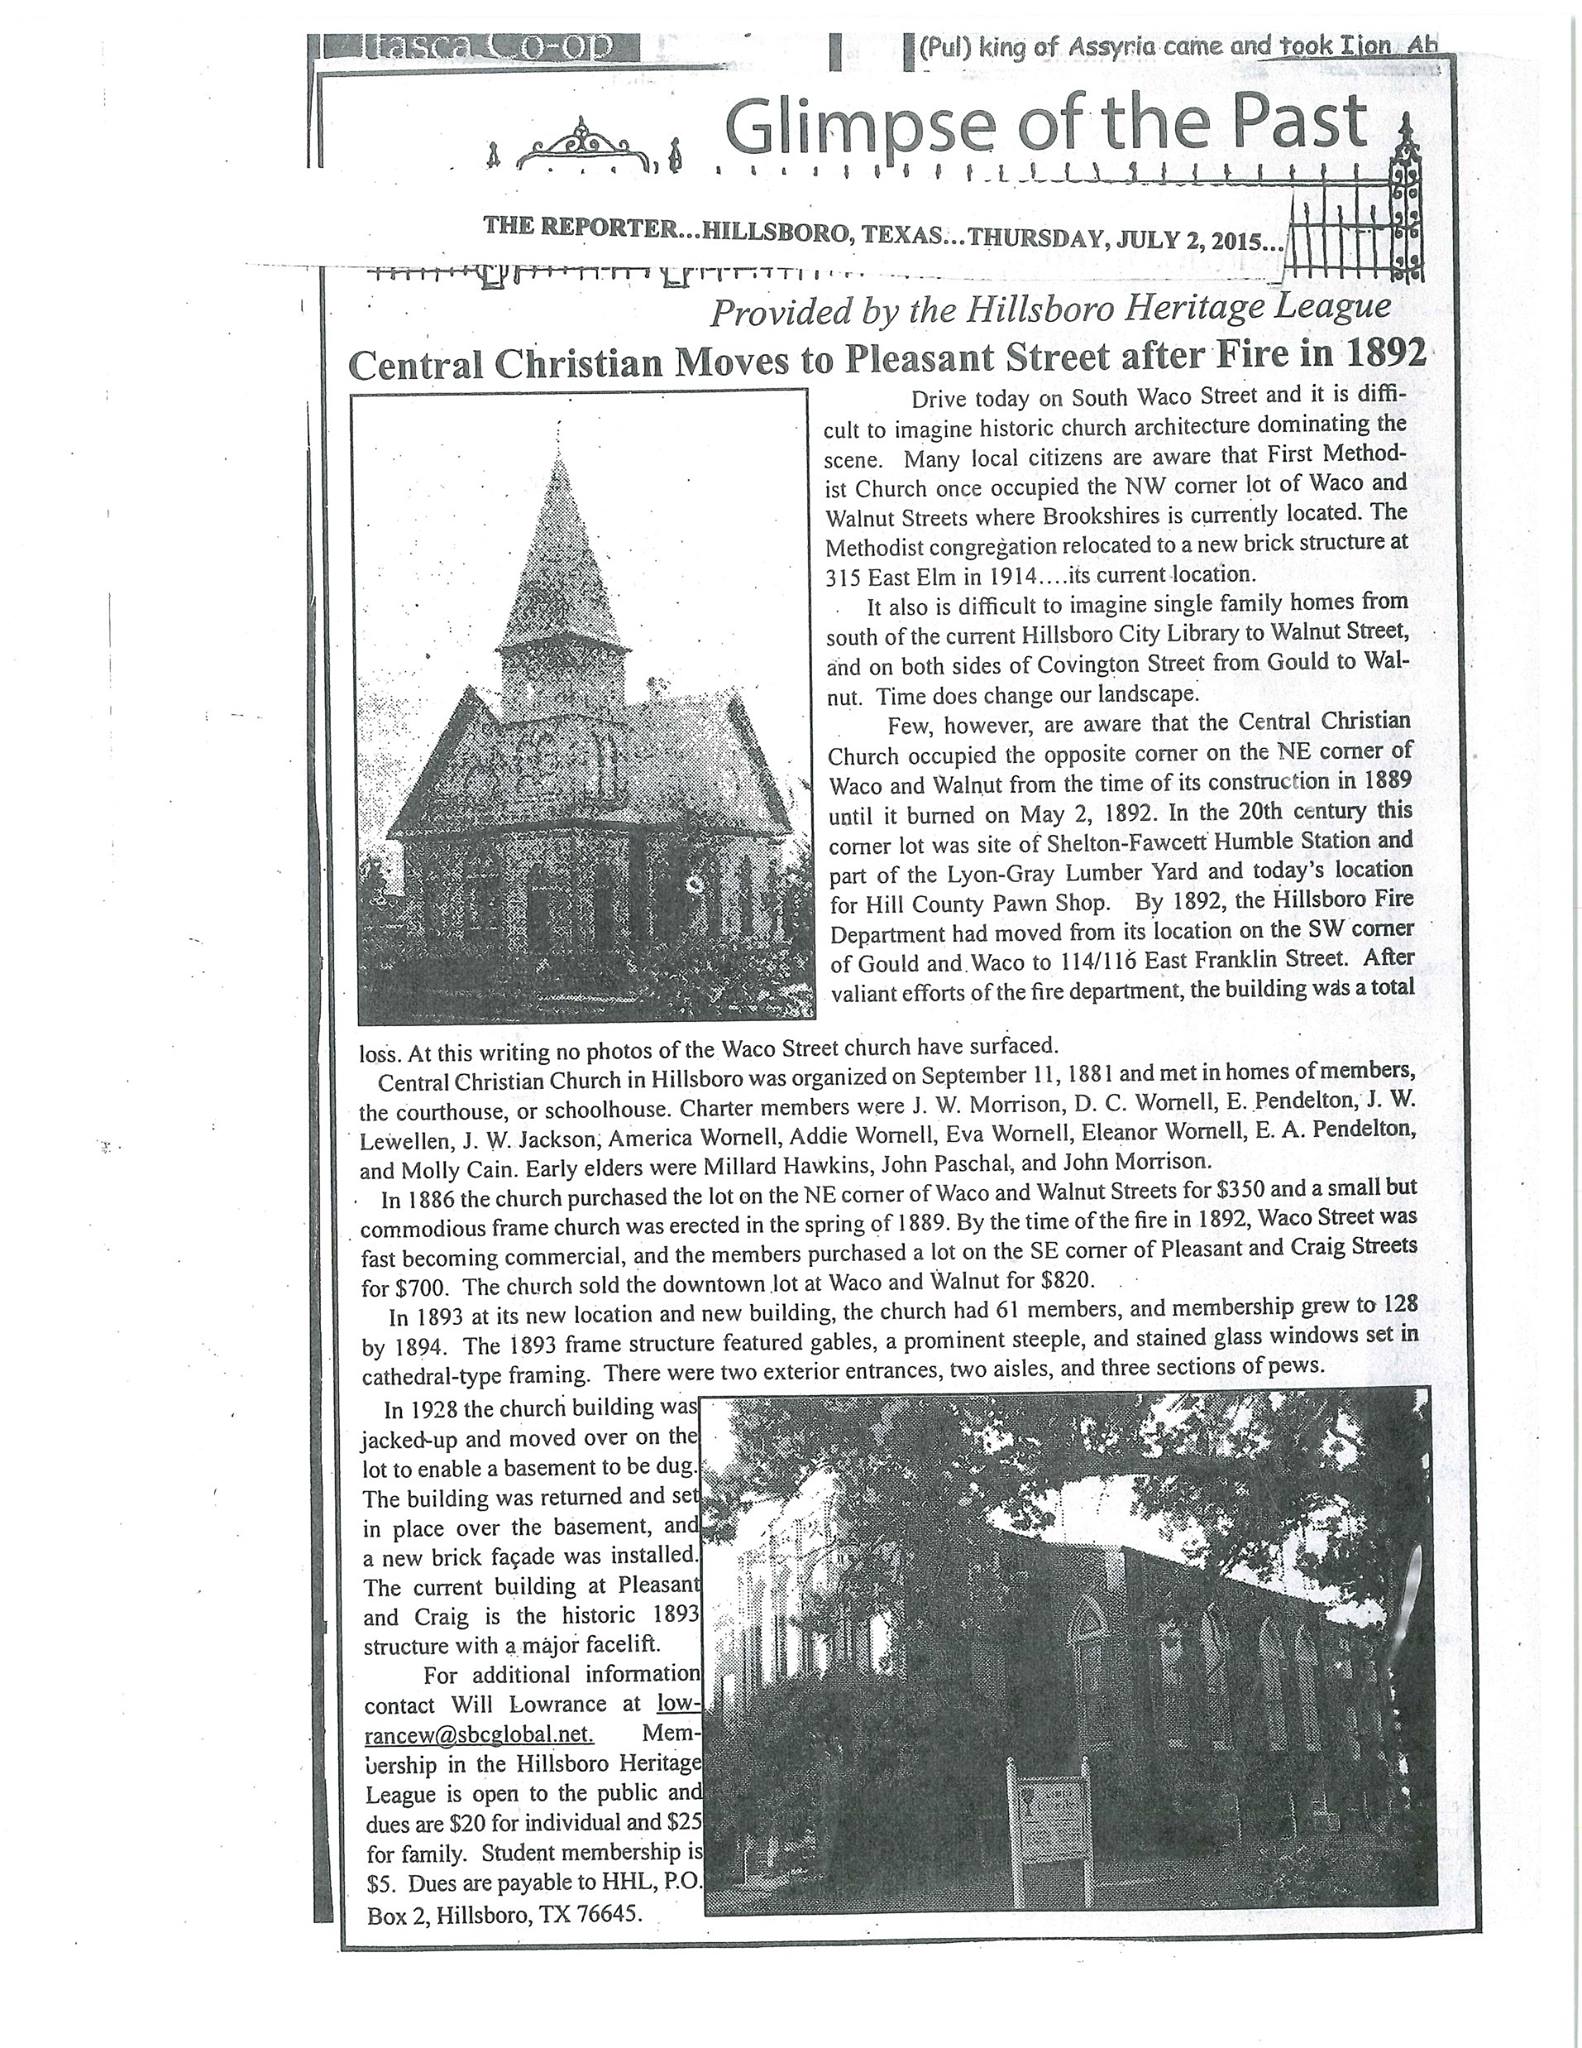 Glimpse of the Past: Central Christian Moves to Pleasant Street after 1892 Fire